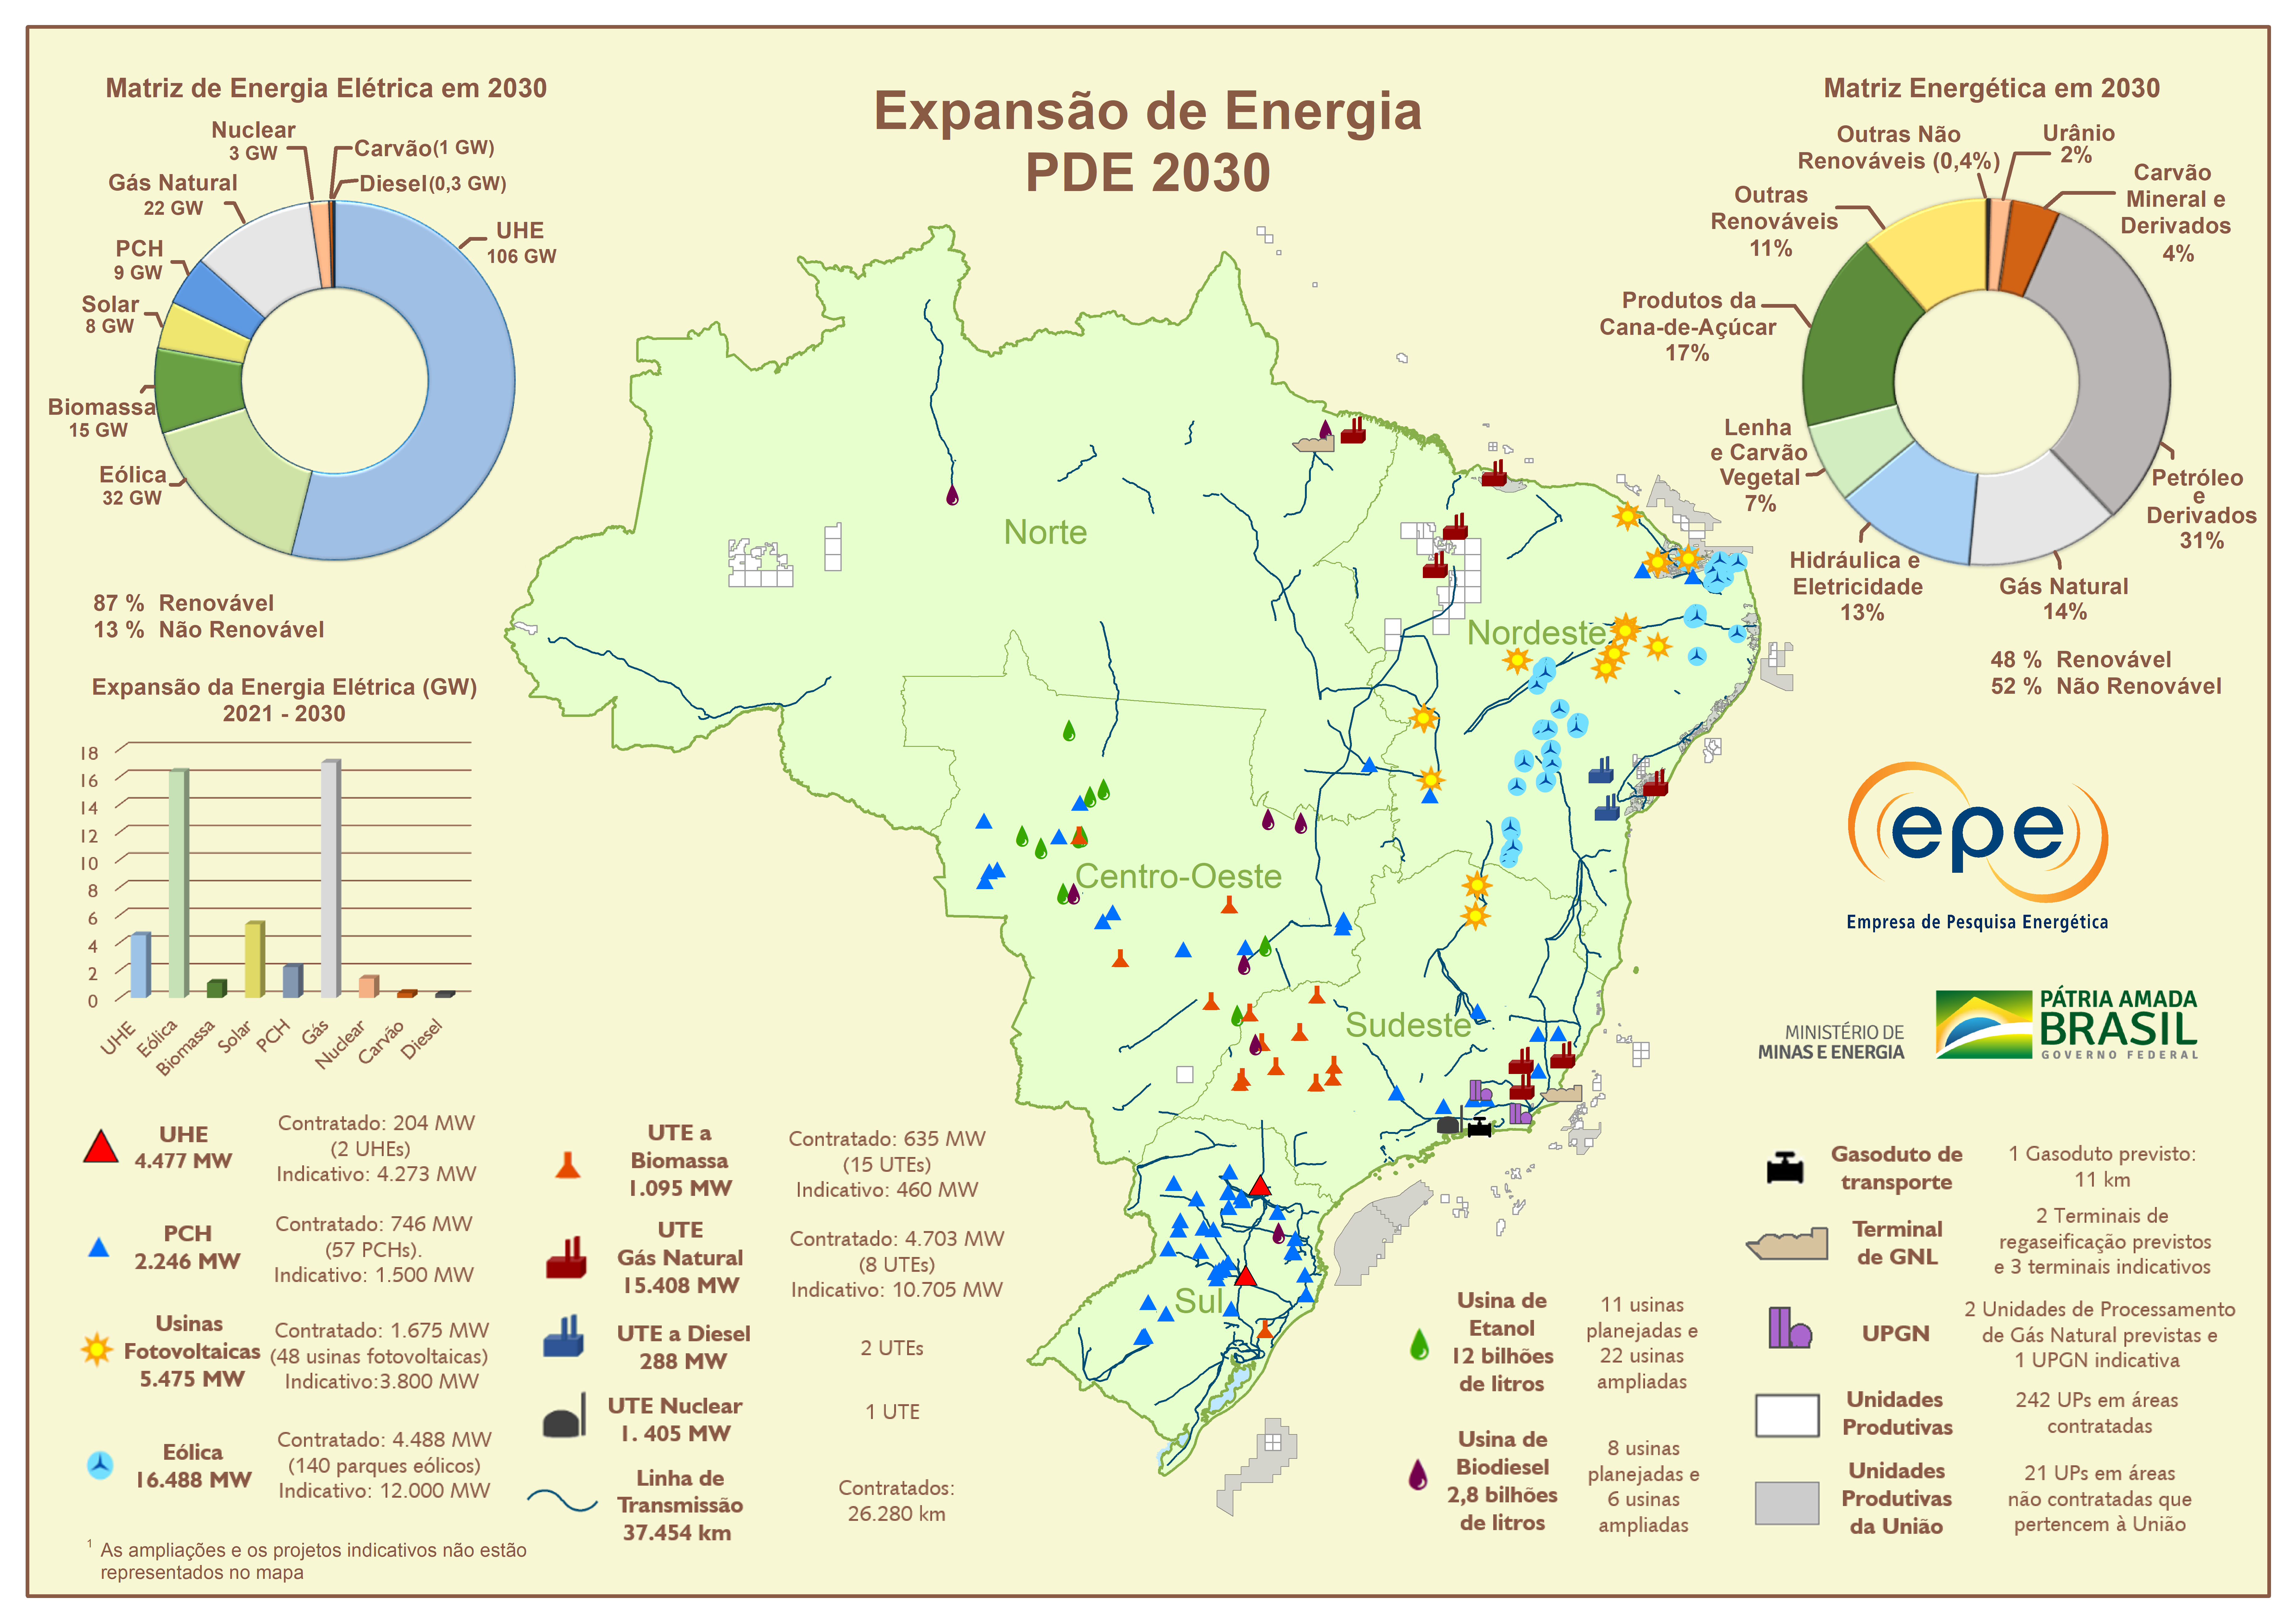 A3_Expansao_Energia_PDE2030_02_21.png